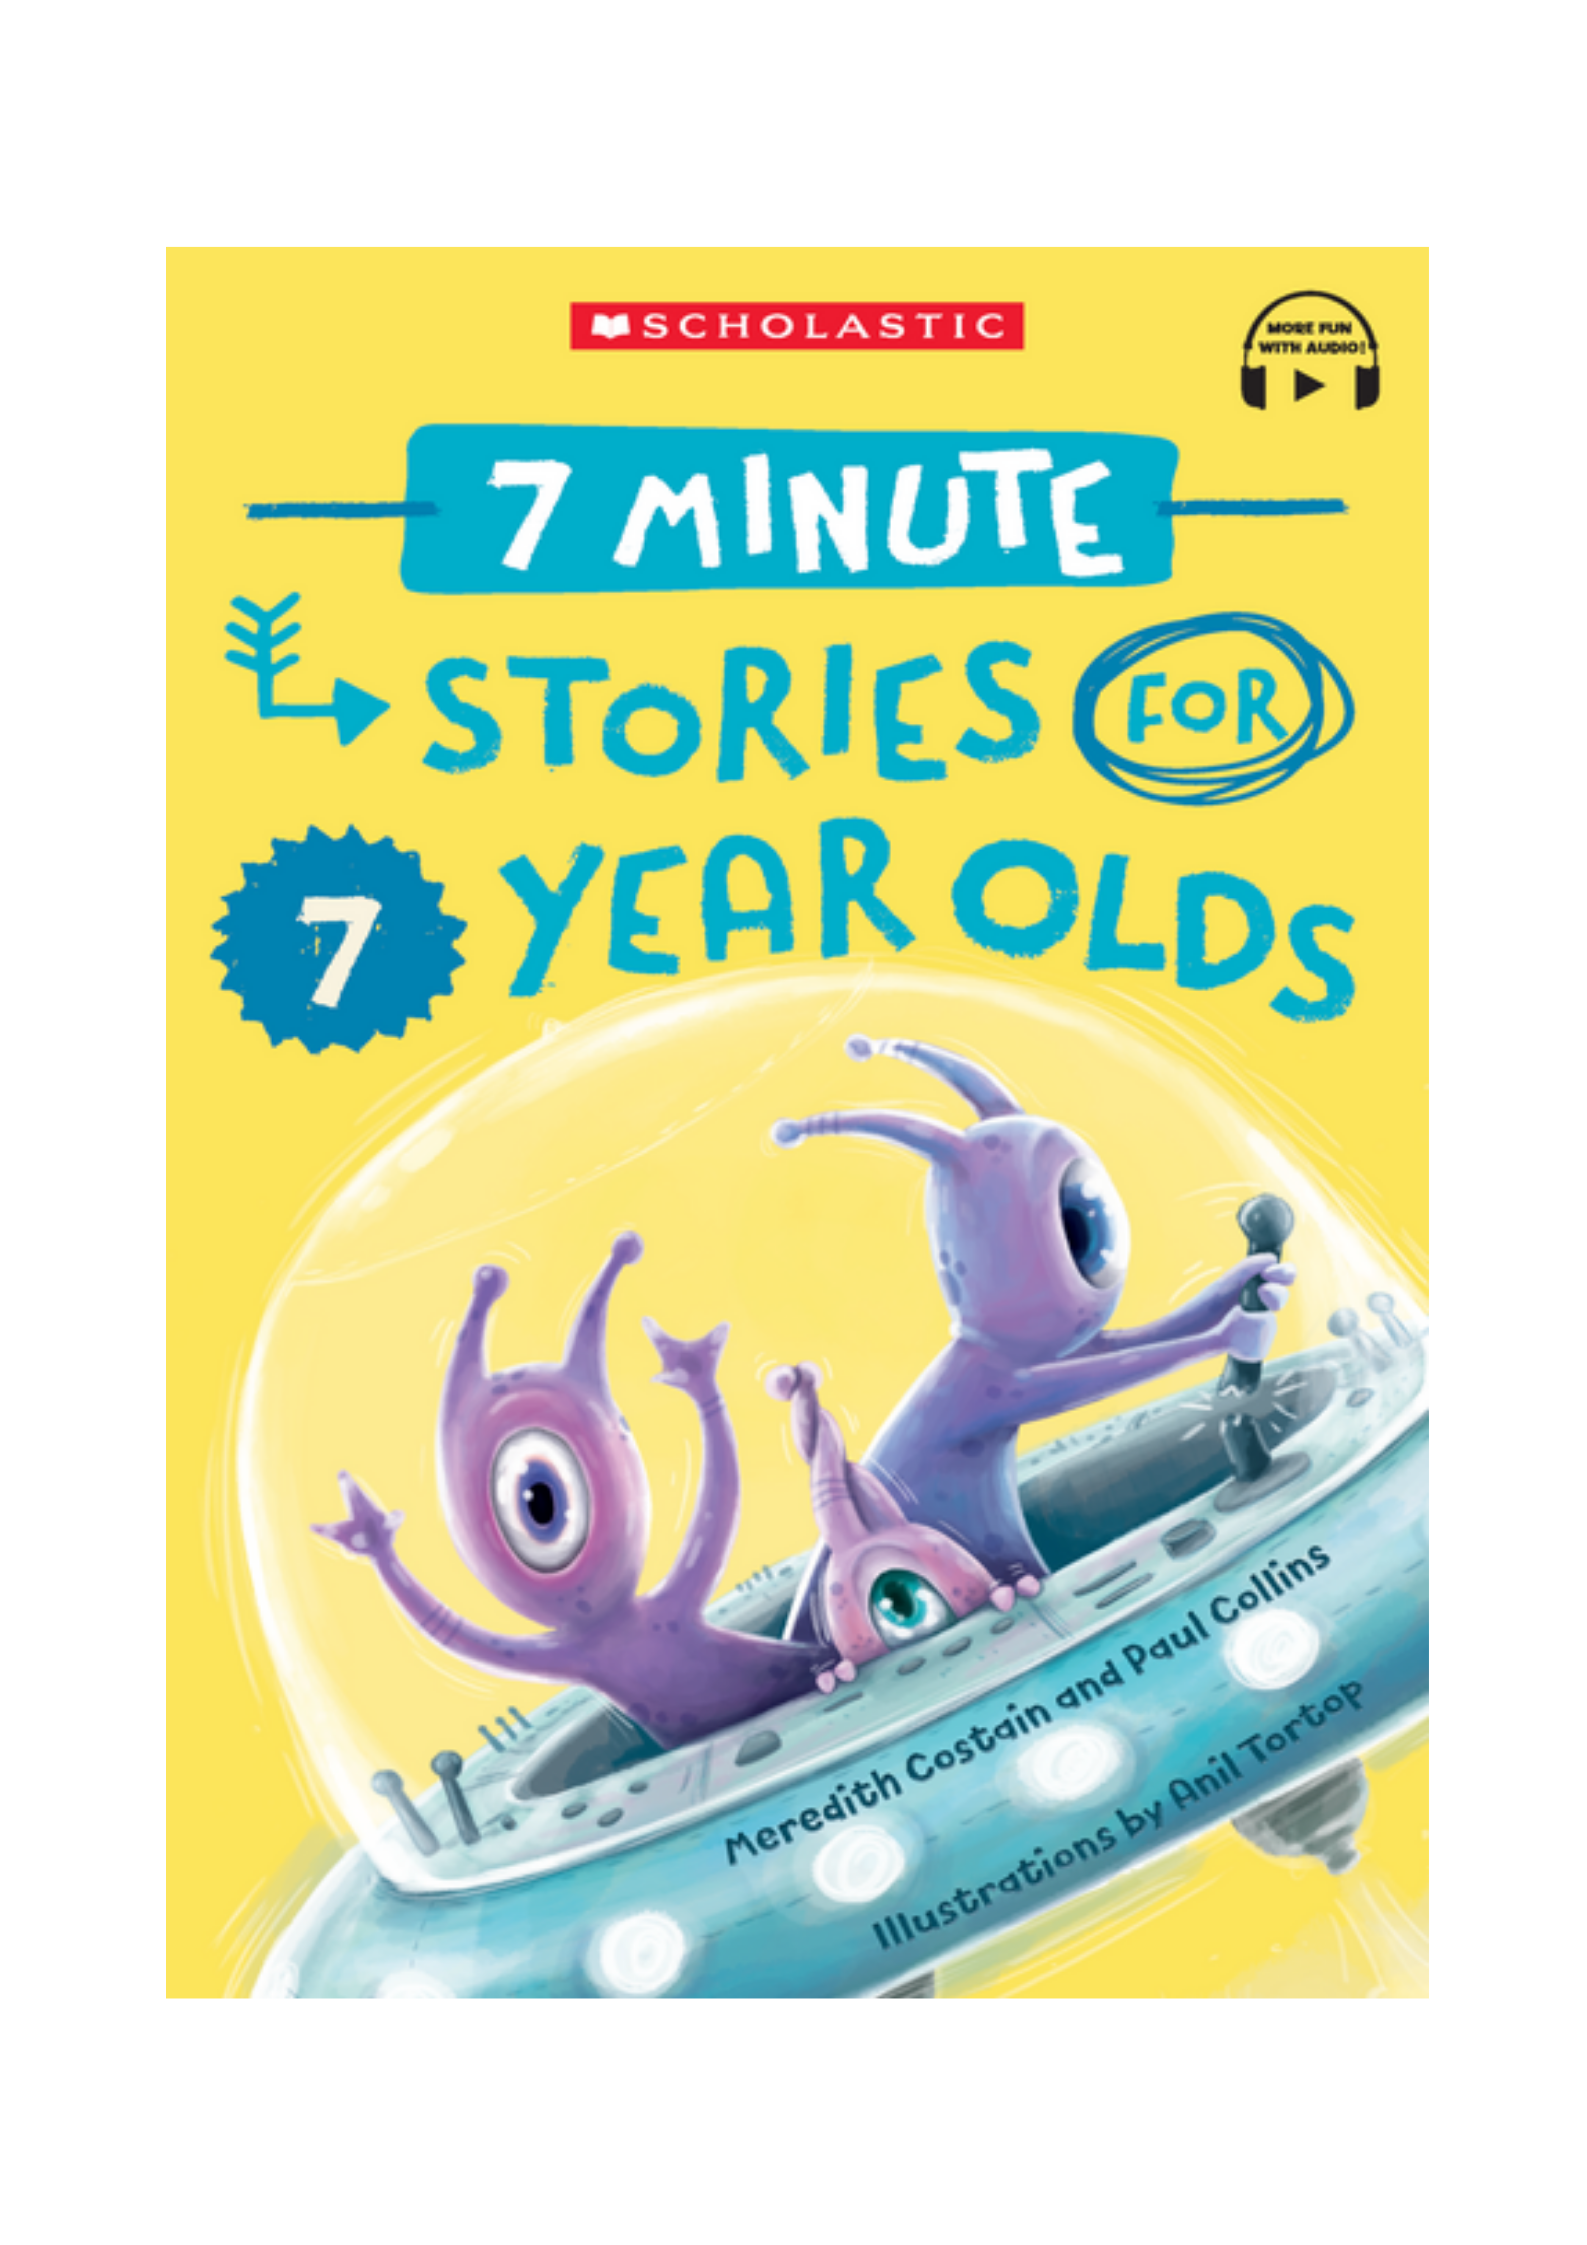 Seven Minute Stories for 7 Year Olds